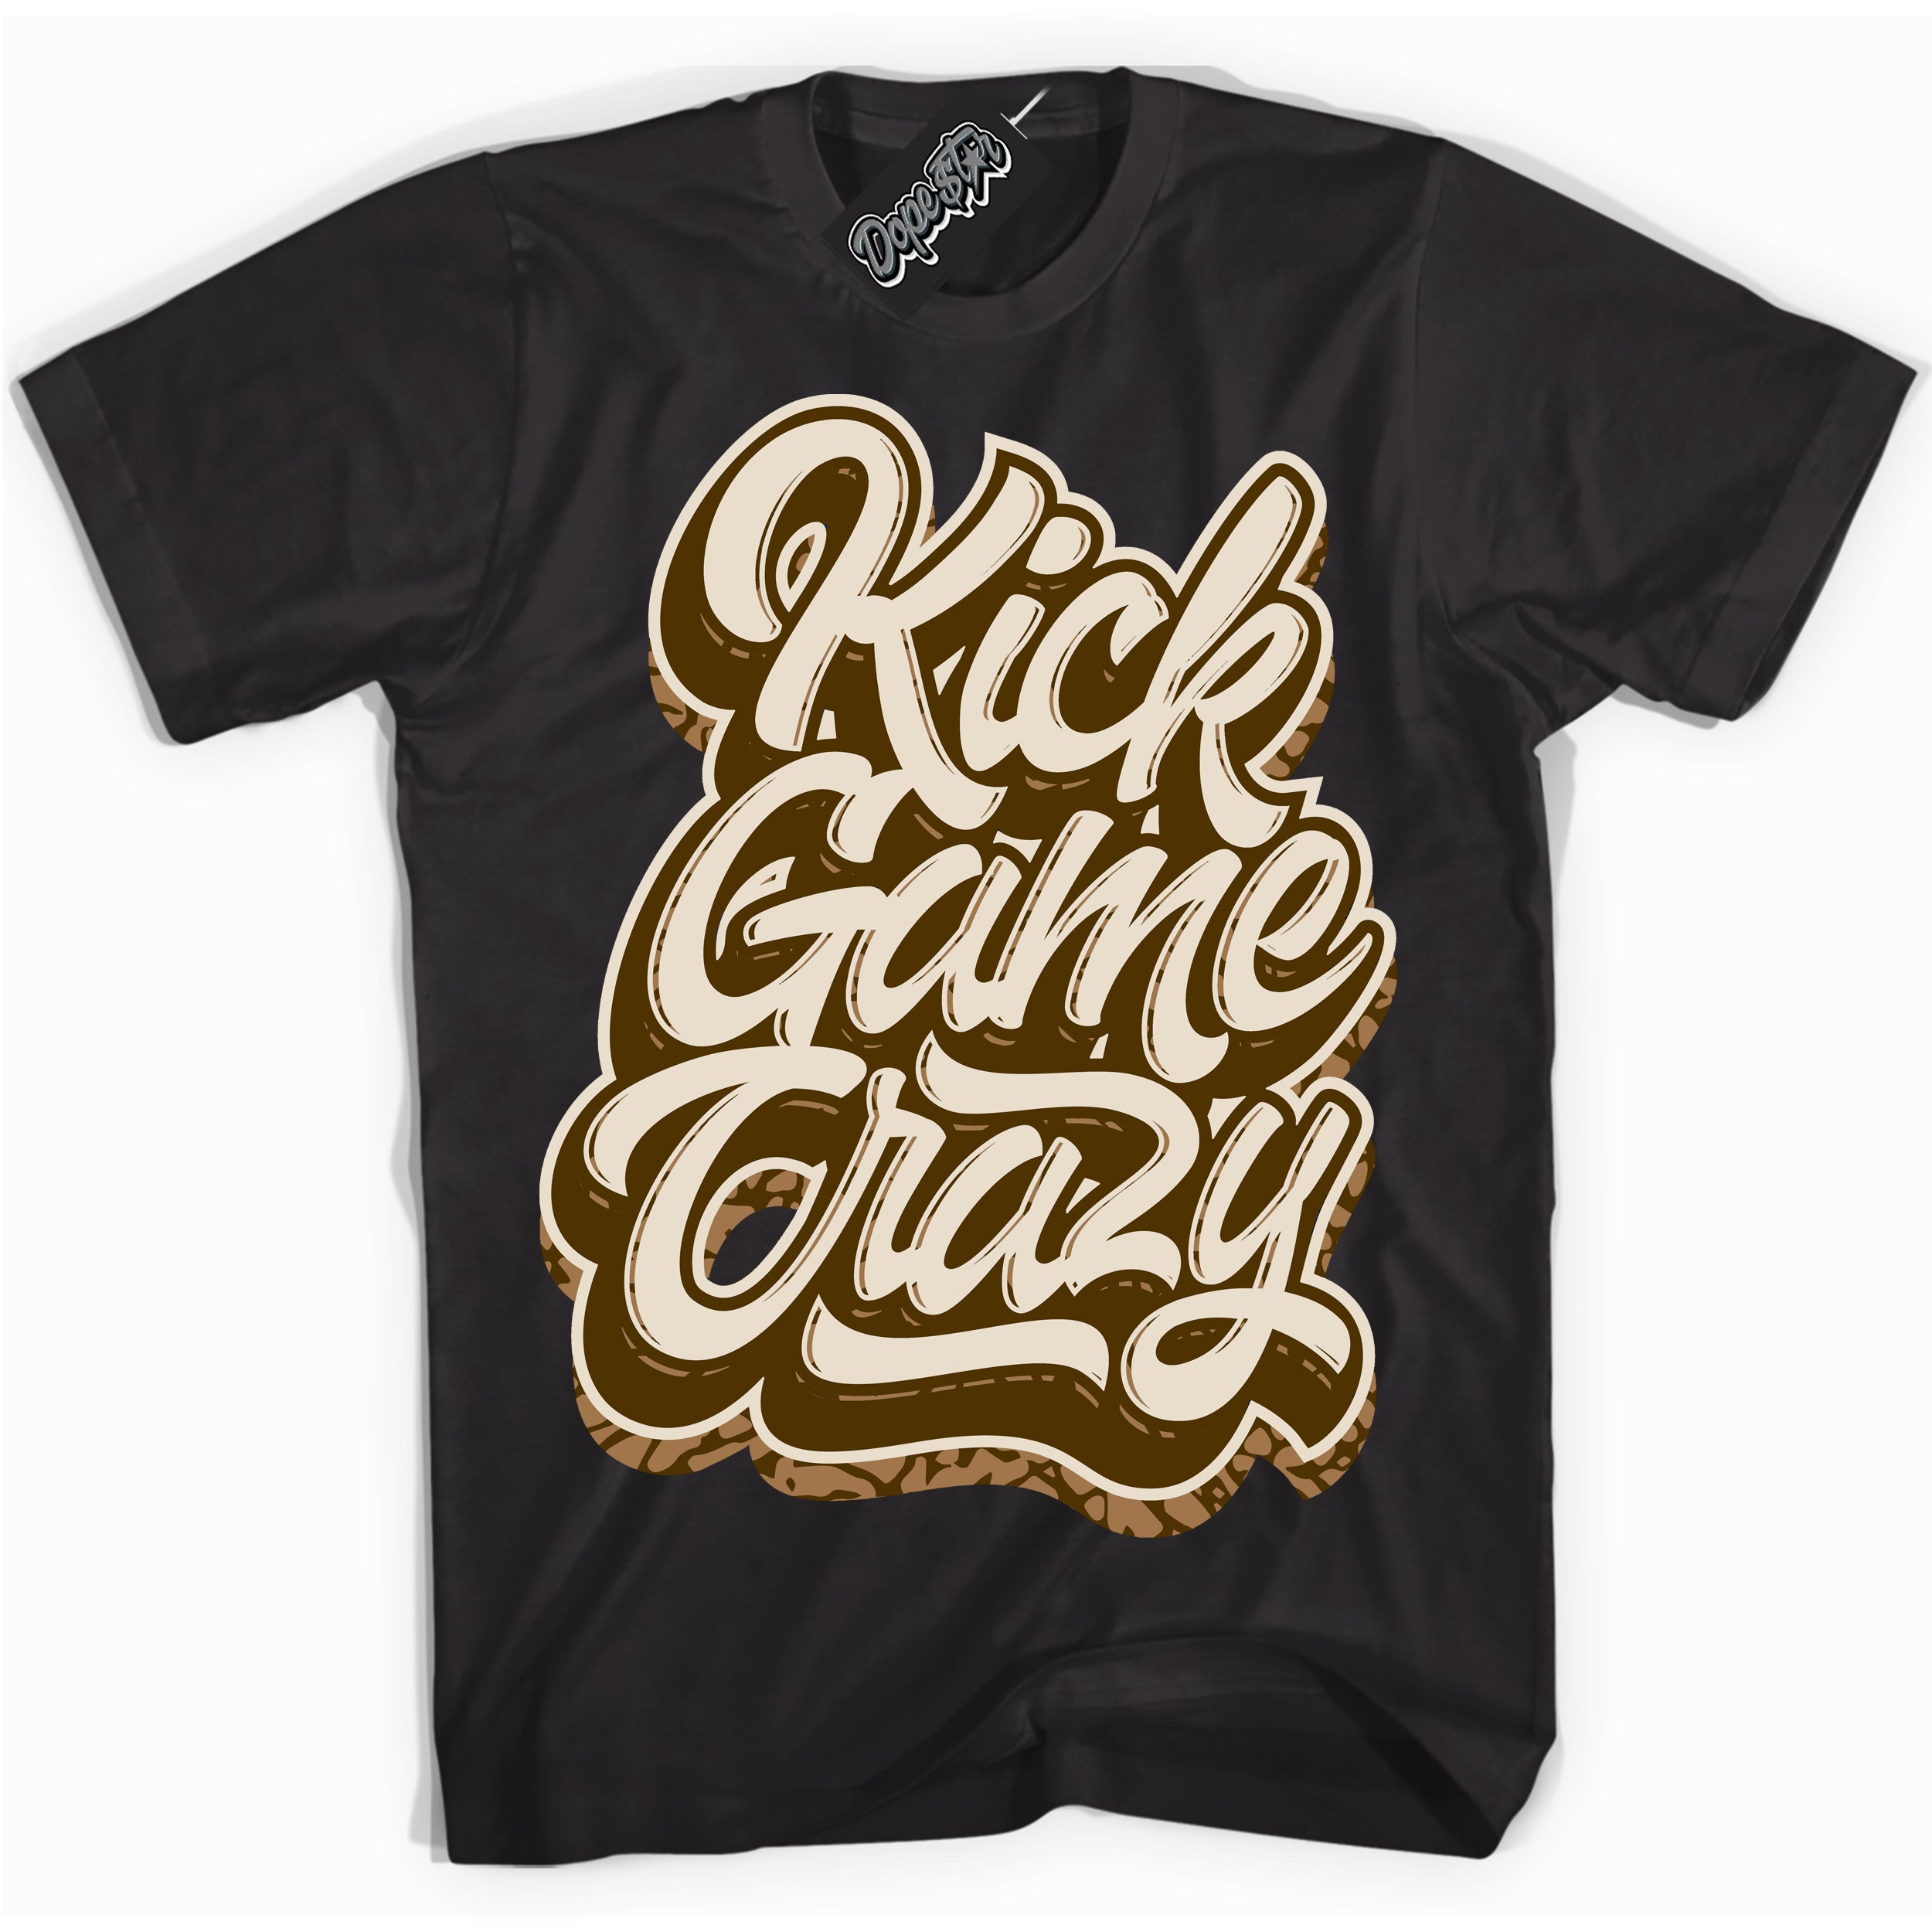 Cool Black graphic tee with “ Kick Game Crazy ” design, that perfectly matches Palomino 3s sneakers 